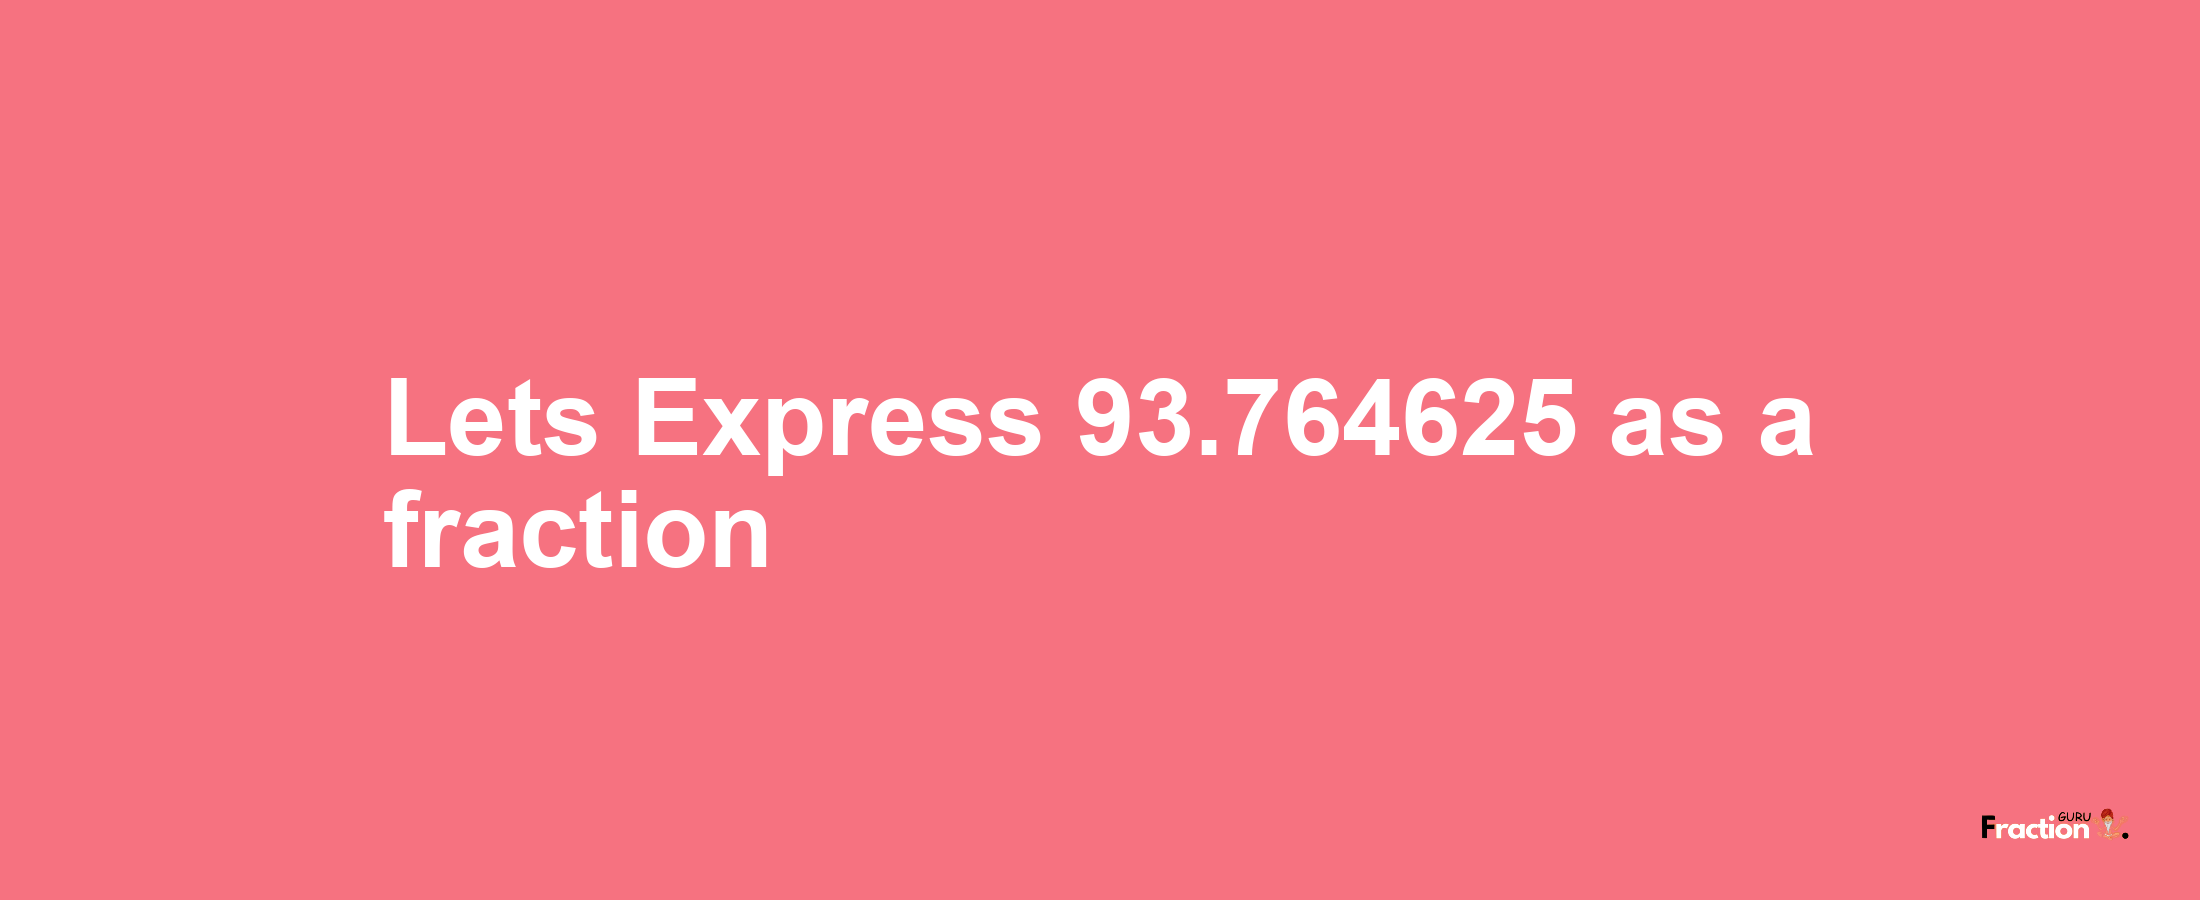 Lets Express 93.764625 as afraction